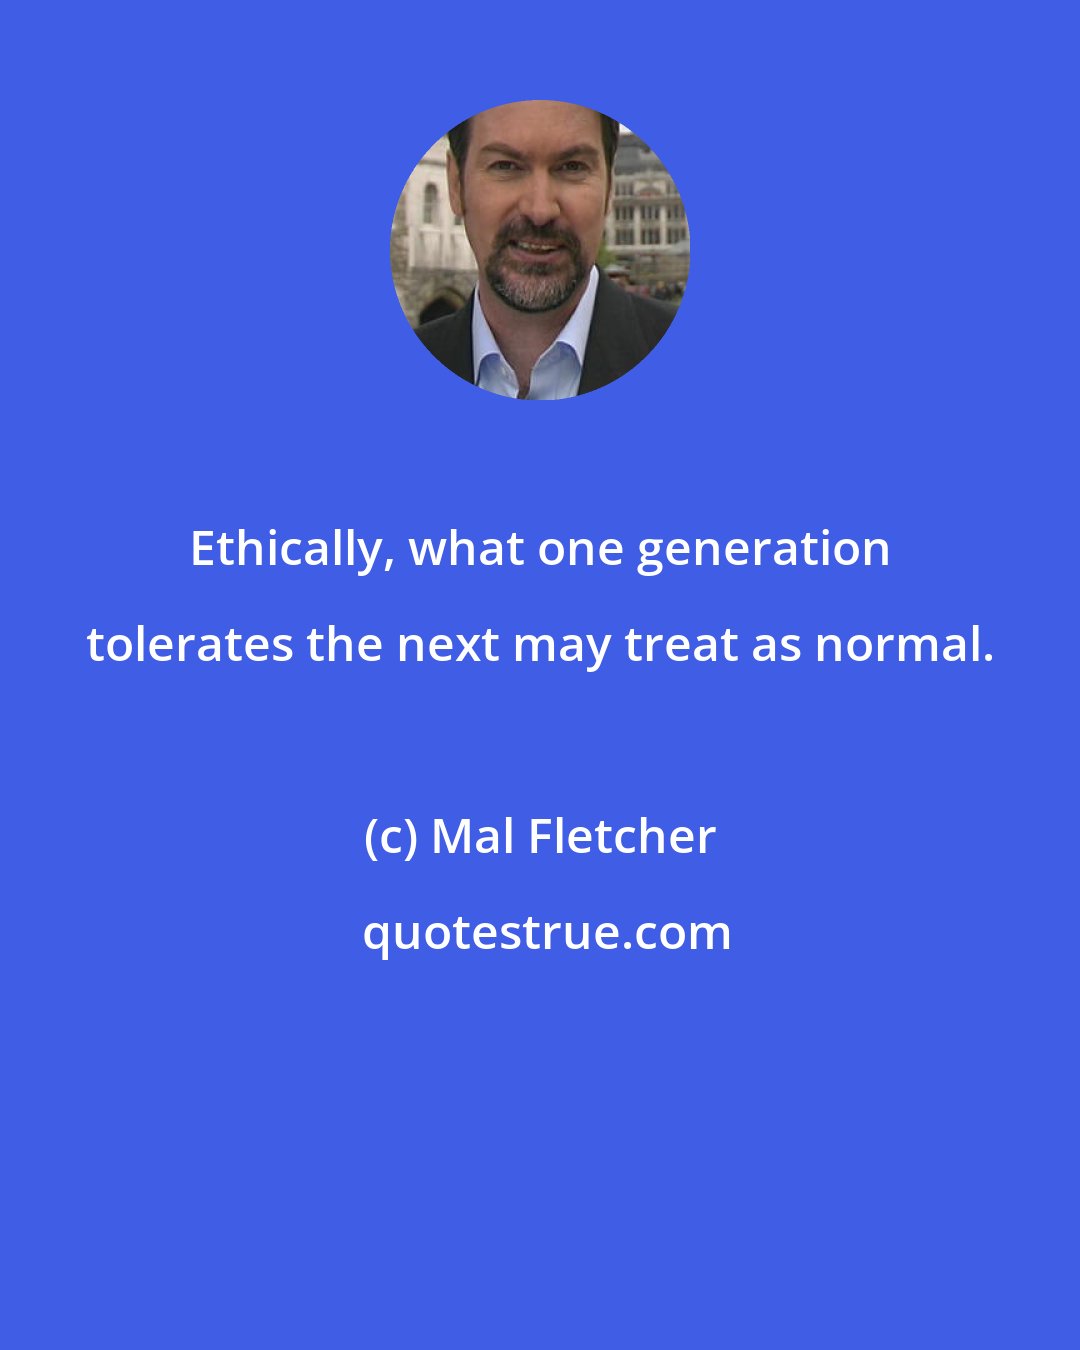 Mal Fletcher: Ethically, what one generation tolerates the next may treat as normal.